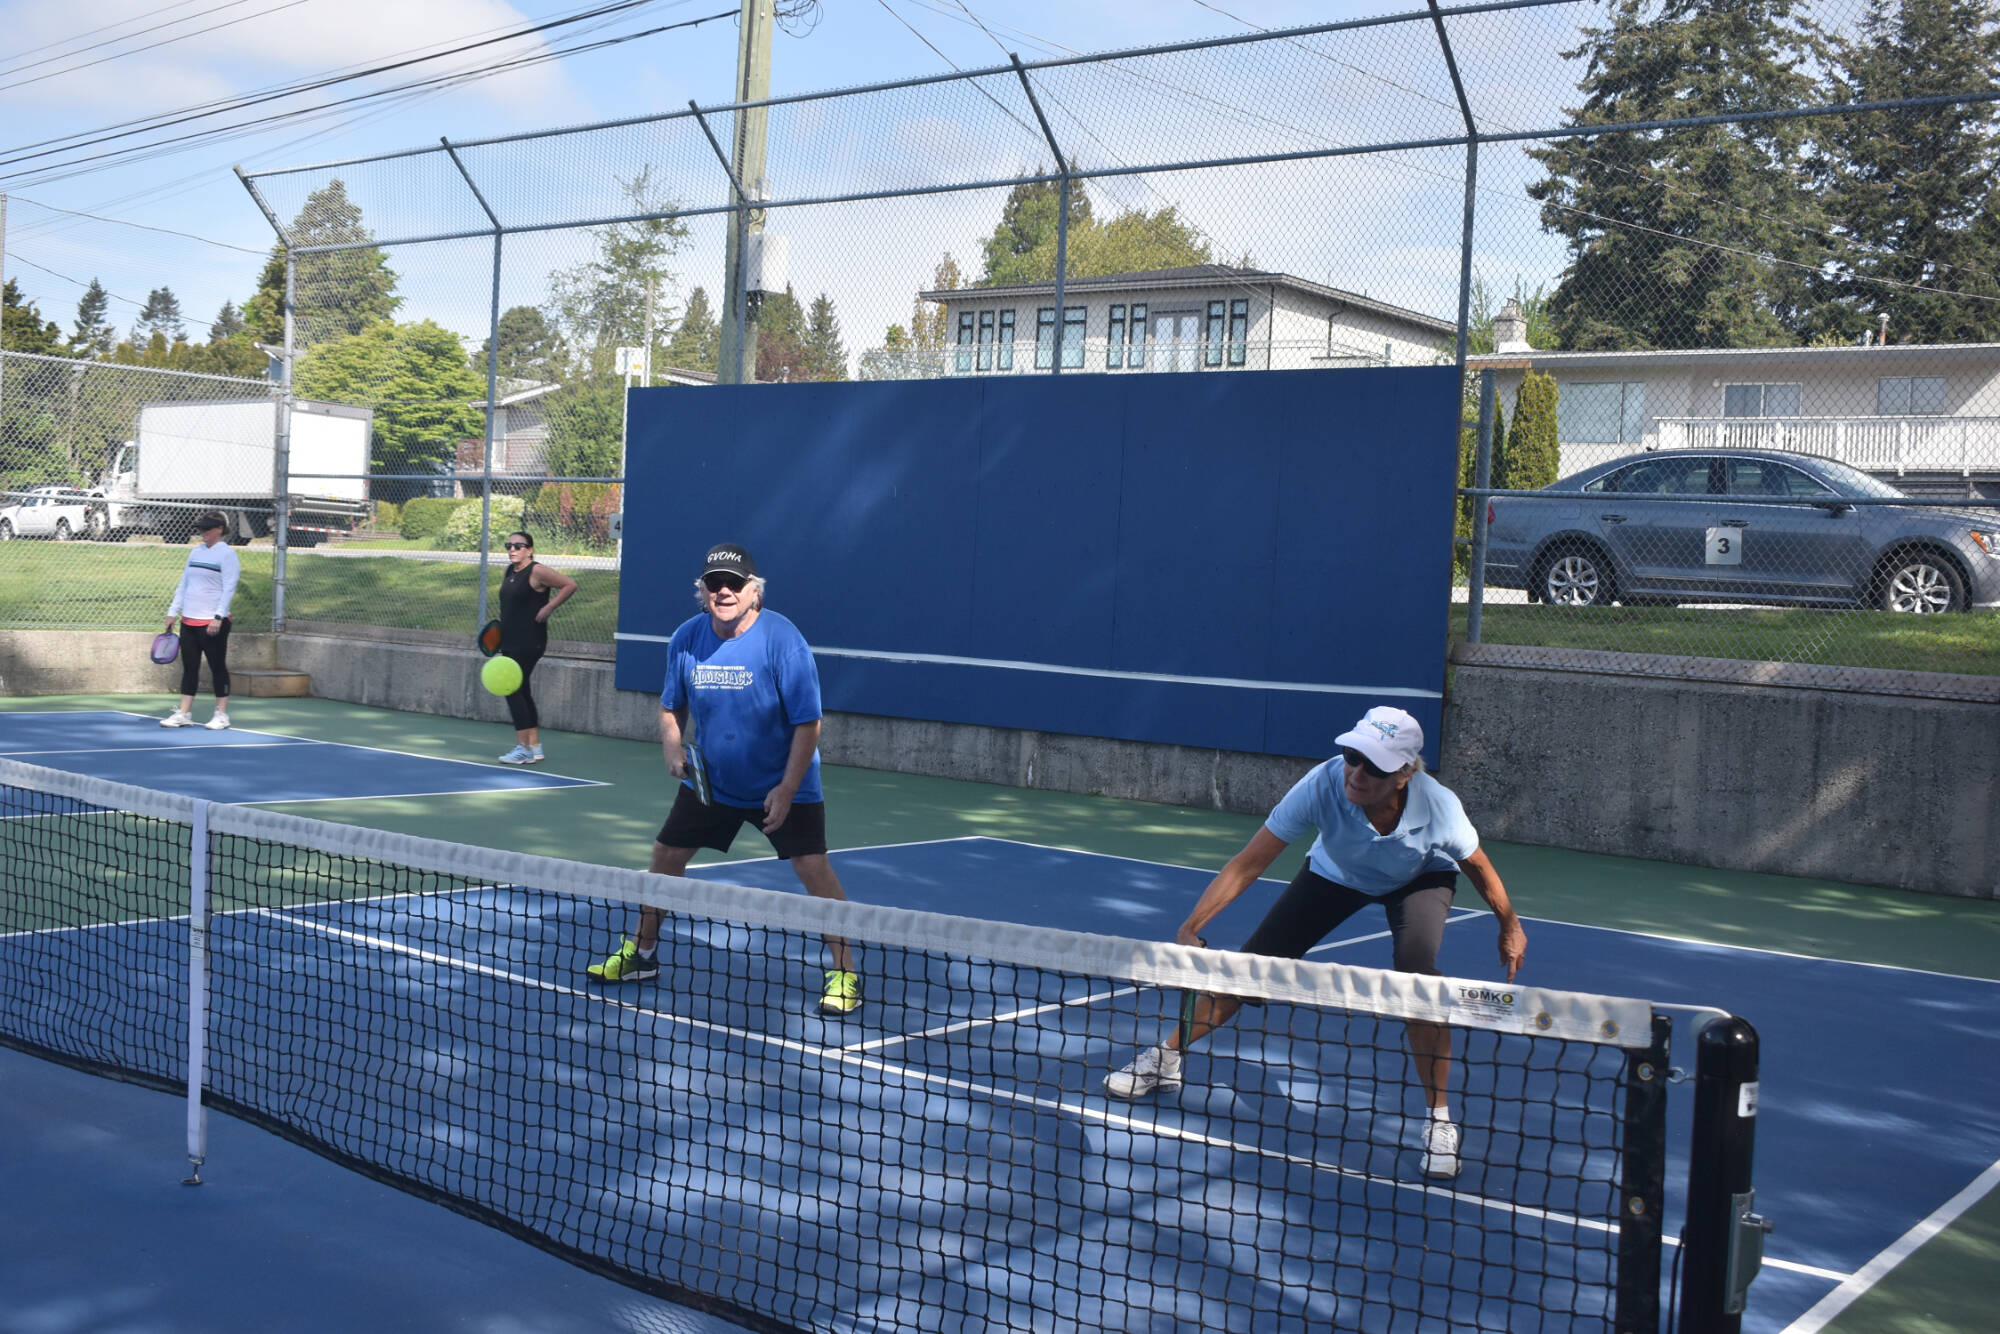 Pickleball players were out enjoying the country’s – and North America’s – fastest-growing sport at the Centennial Park courts in White Rock during recent warm weather. According to Pickleball Canada, the sport is now growing fastest among players 18-34 years old. (Sobia Moman photo)